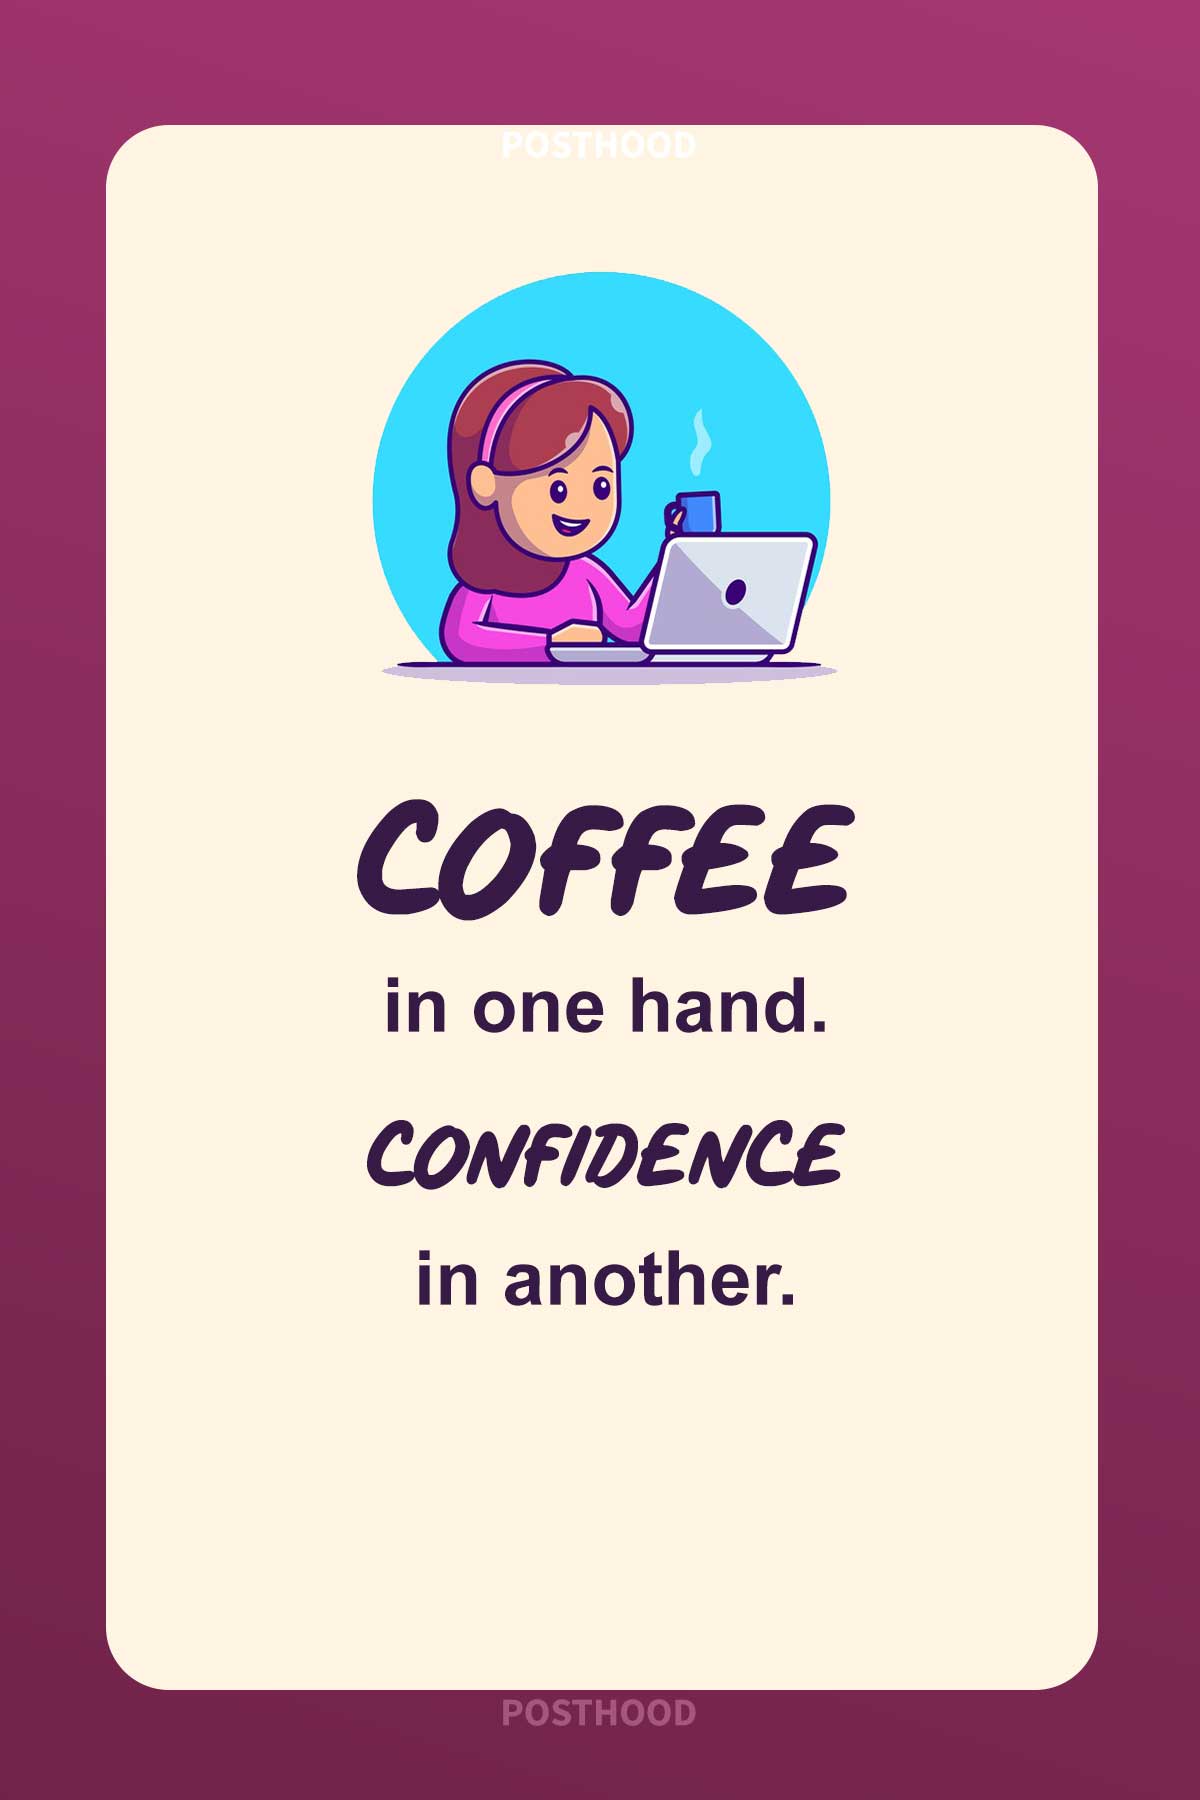 80 motivational coffee quotes for her. Find a great collection of fun coffee quotes that will bring lots of laughter to your table.